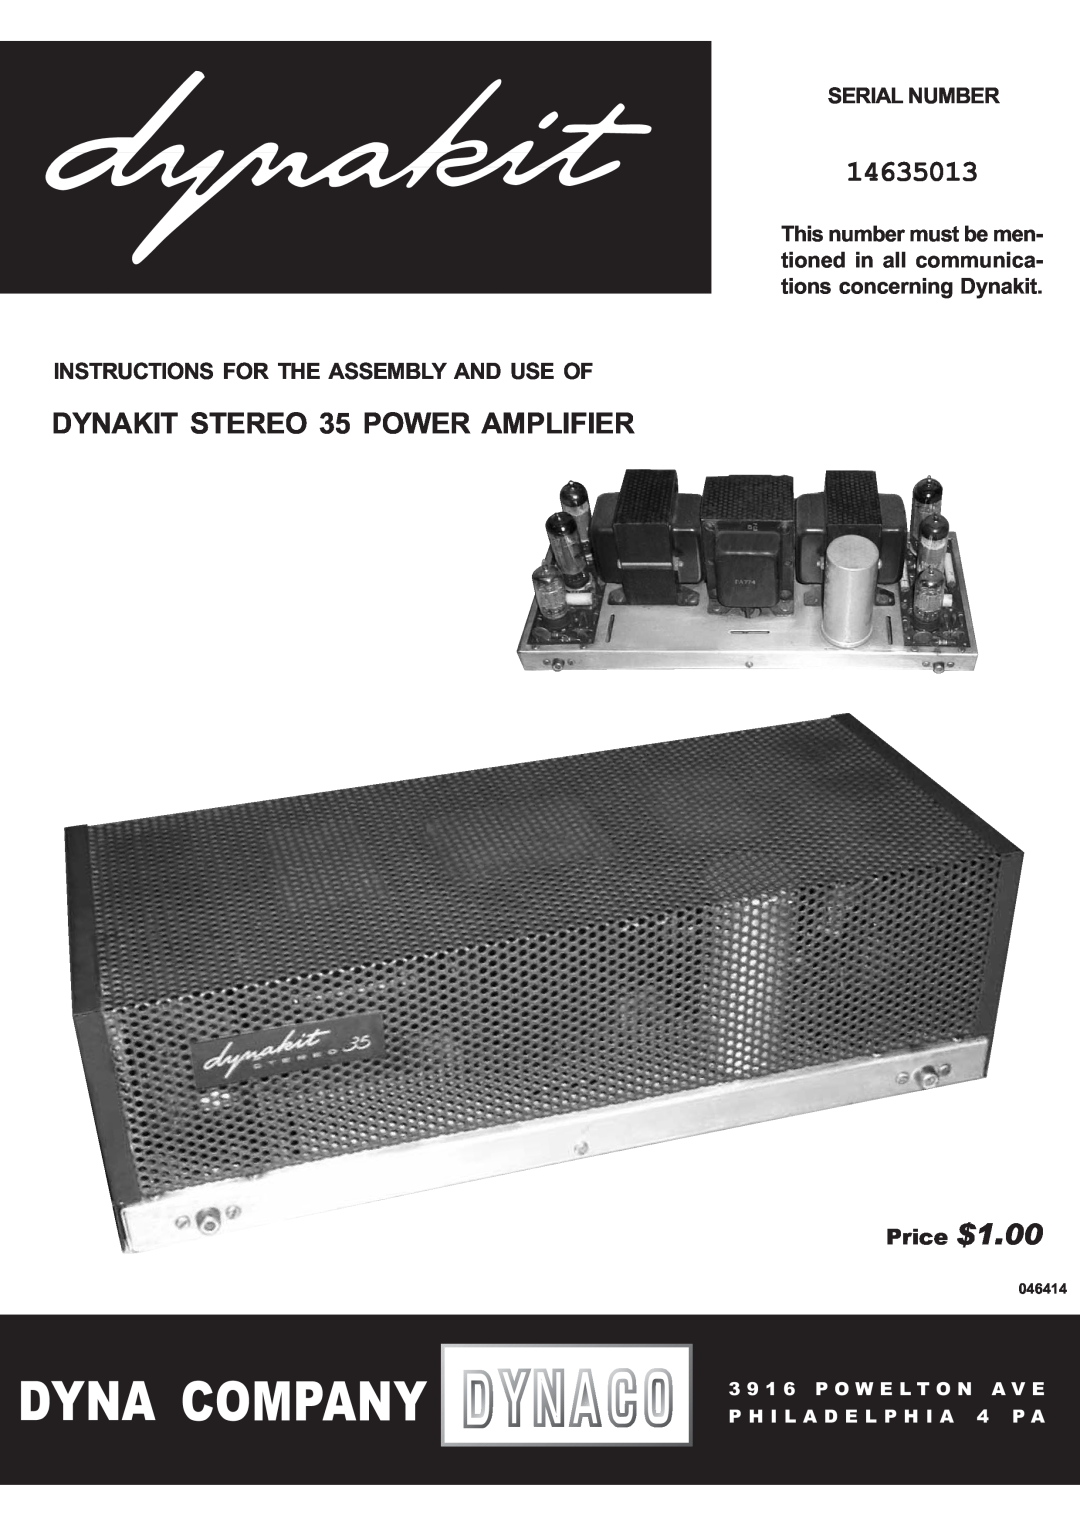 Audio Dynamics 14635013 manual Serial Number, Instructions For The Assembly And Use Of, Price $1.00, 046414 